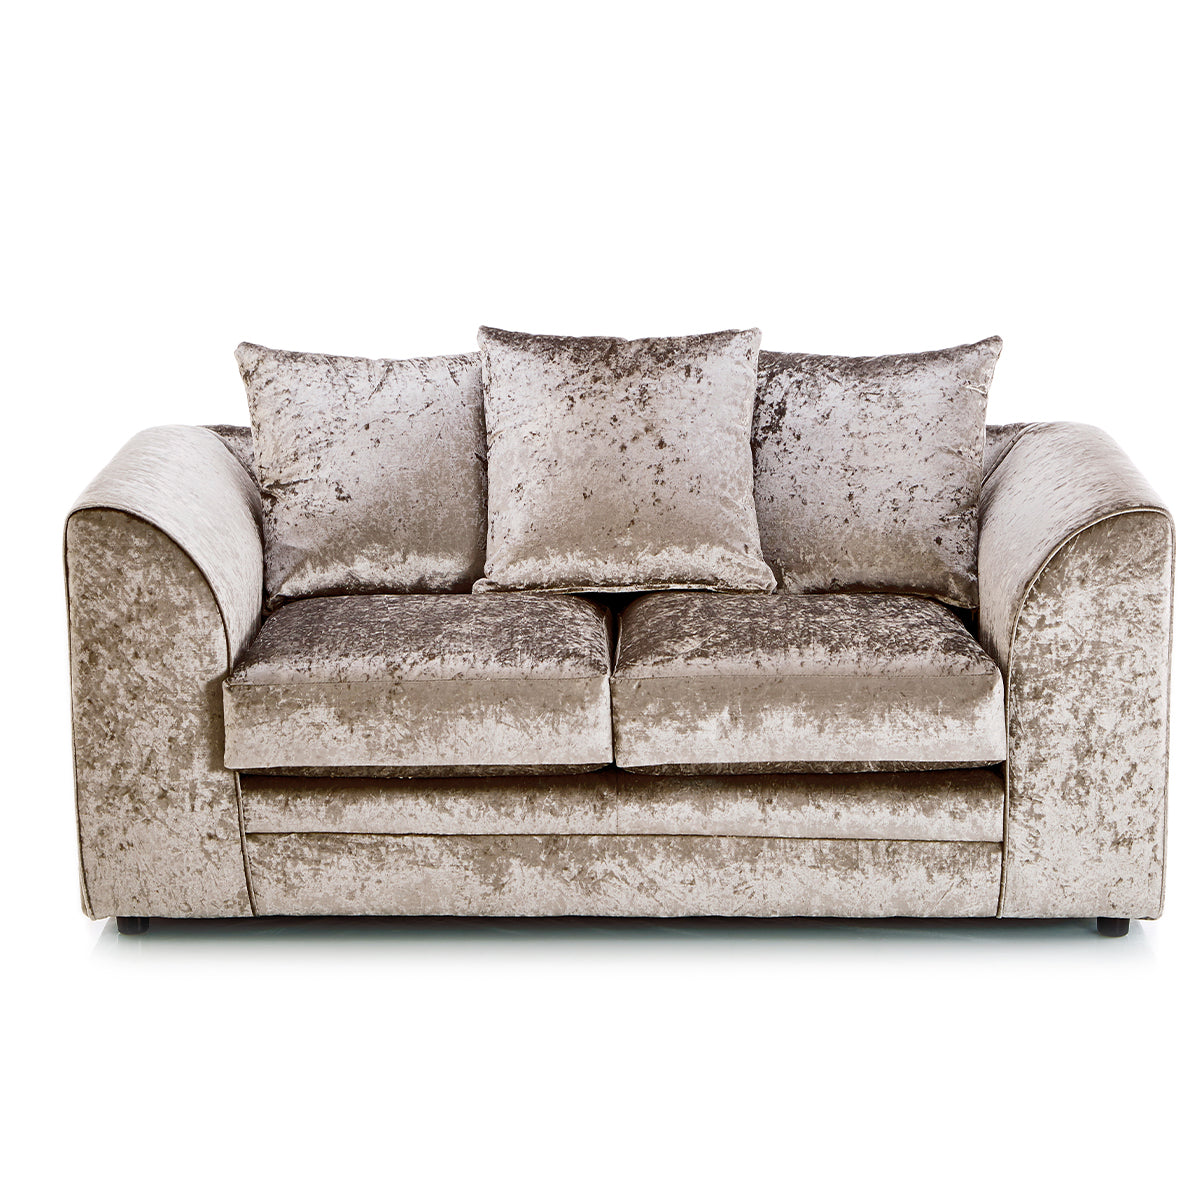 Arabia Crushed Velvet 3 Seater and 2 Seater Sofa Set